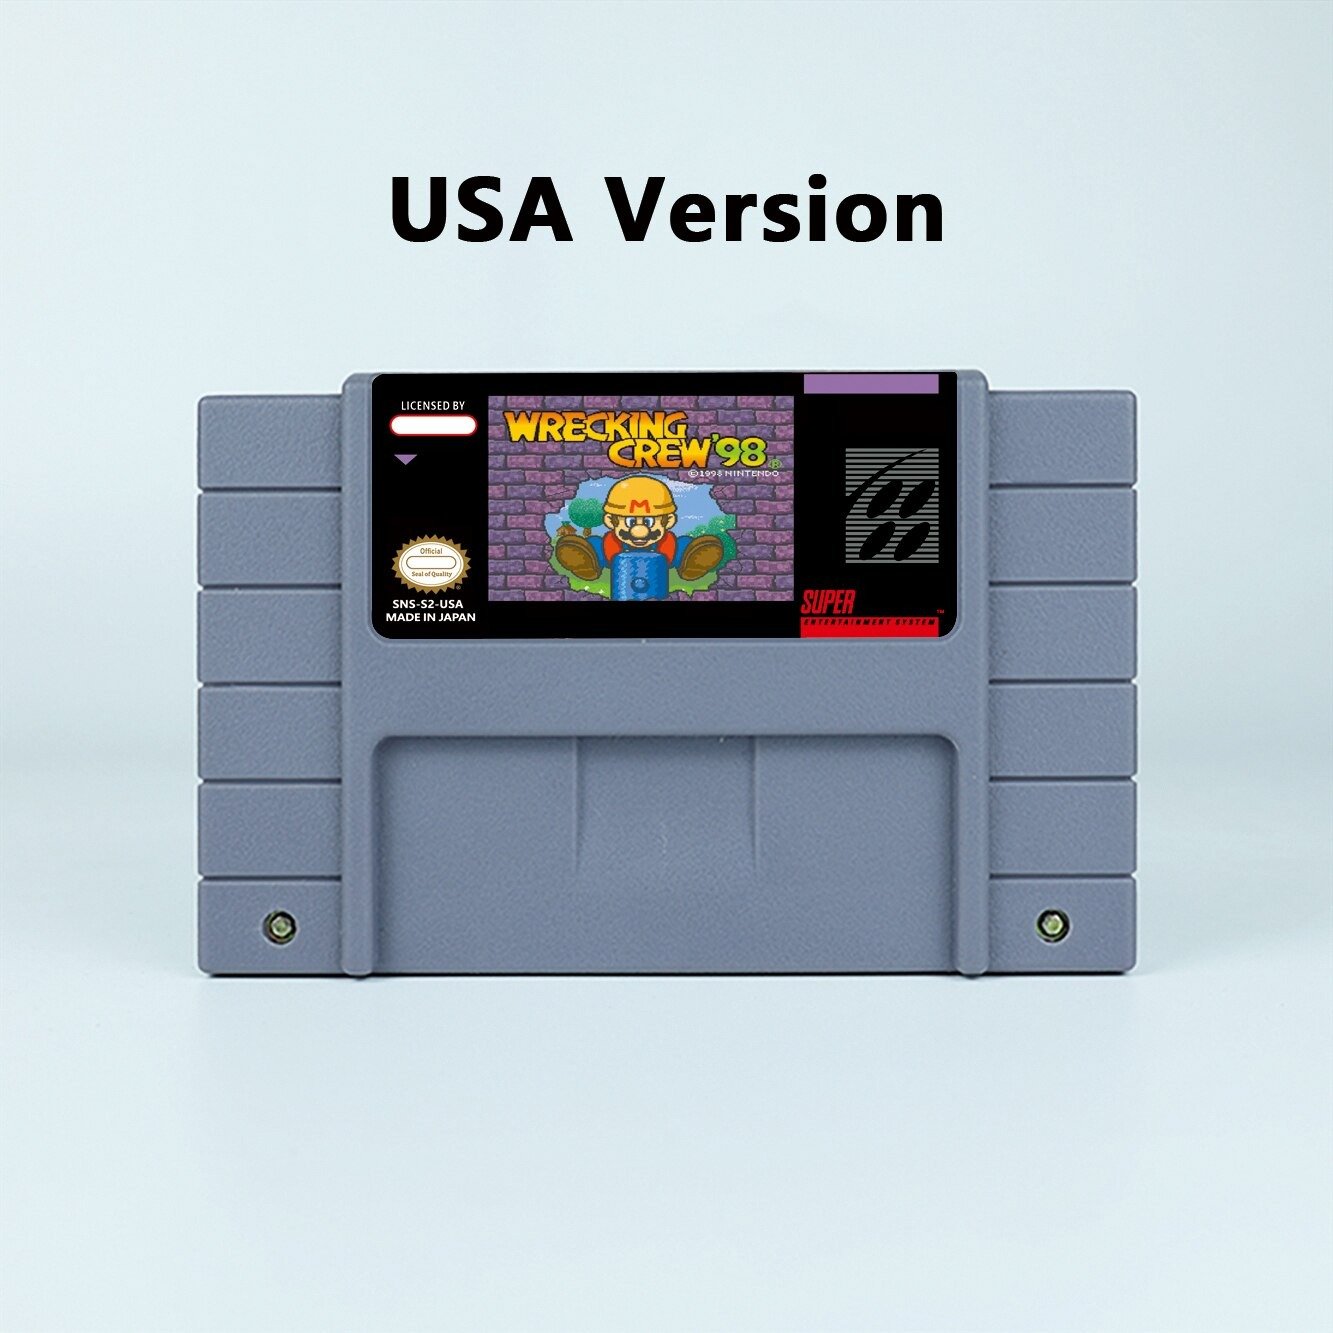 Wrecking Crew '98 RPG Game USA Version Cartridge for SNES Game Consoles